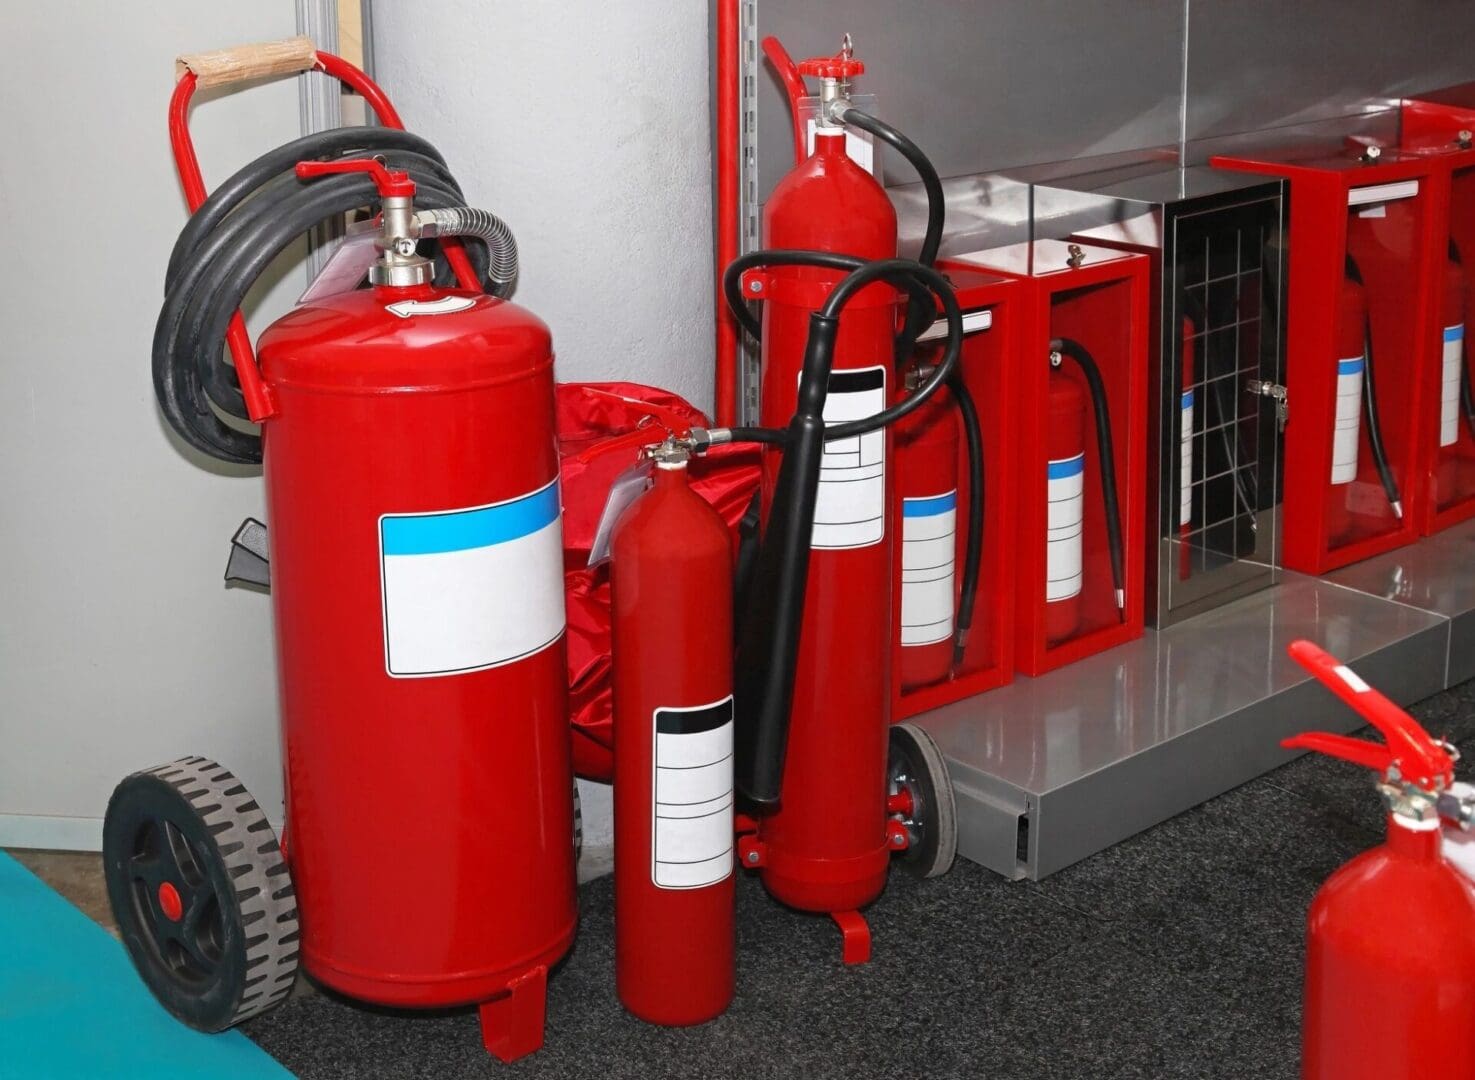 A group of red fire extinguishers sitting next to each other.